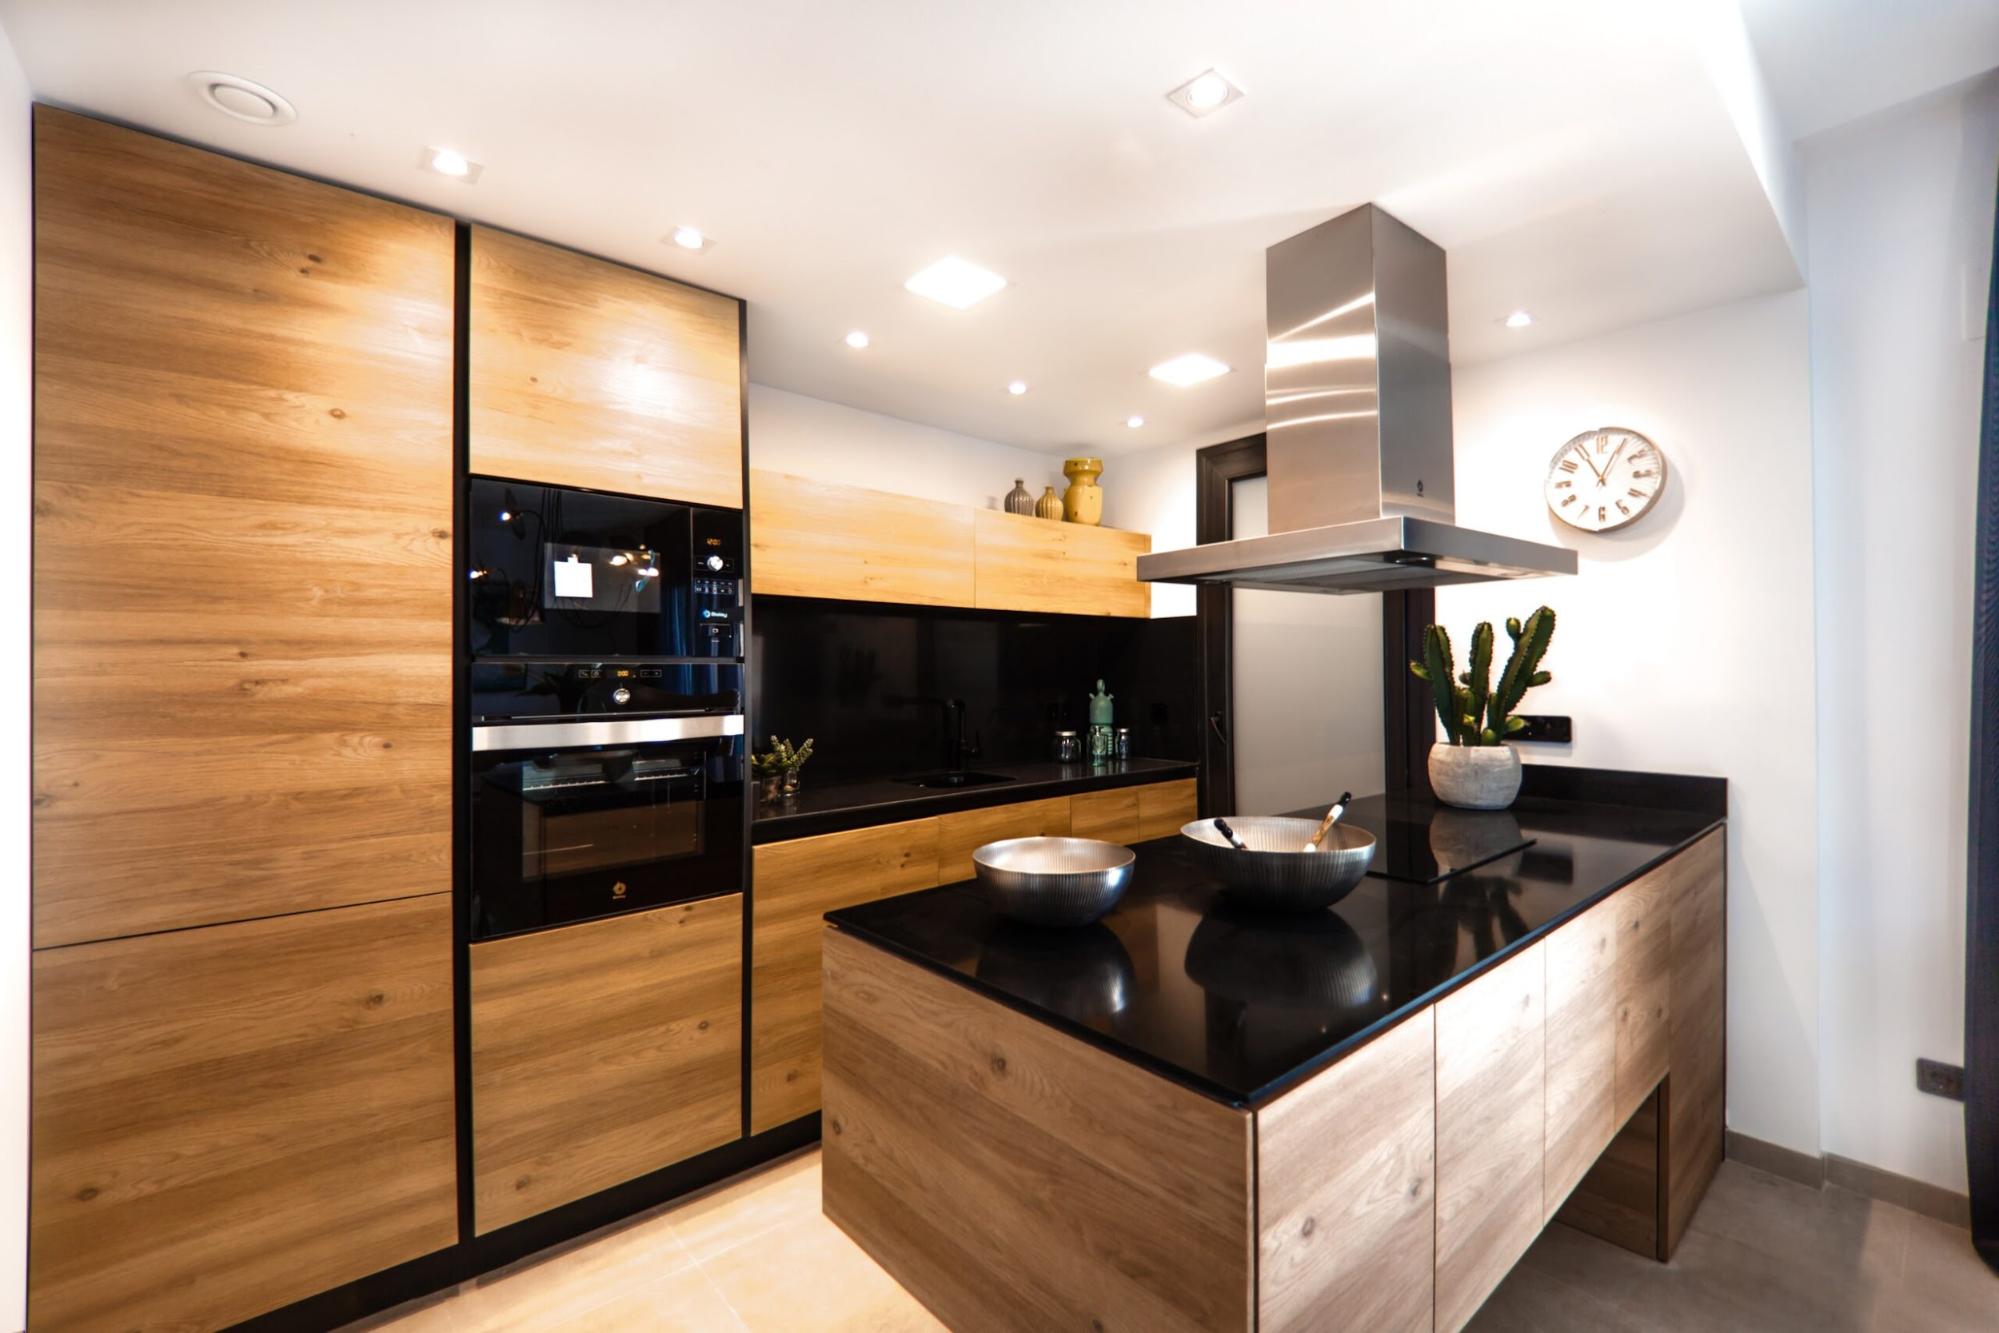 Veneer kitchen is a motivational kitchen for the middle class